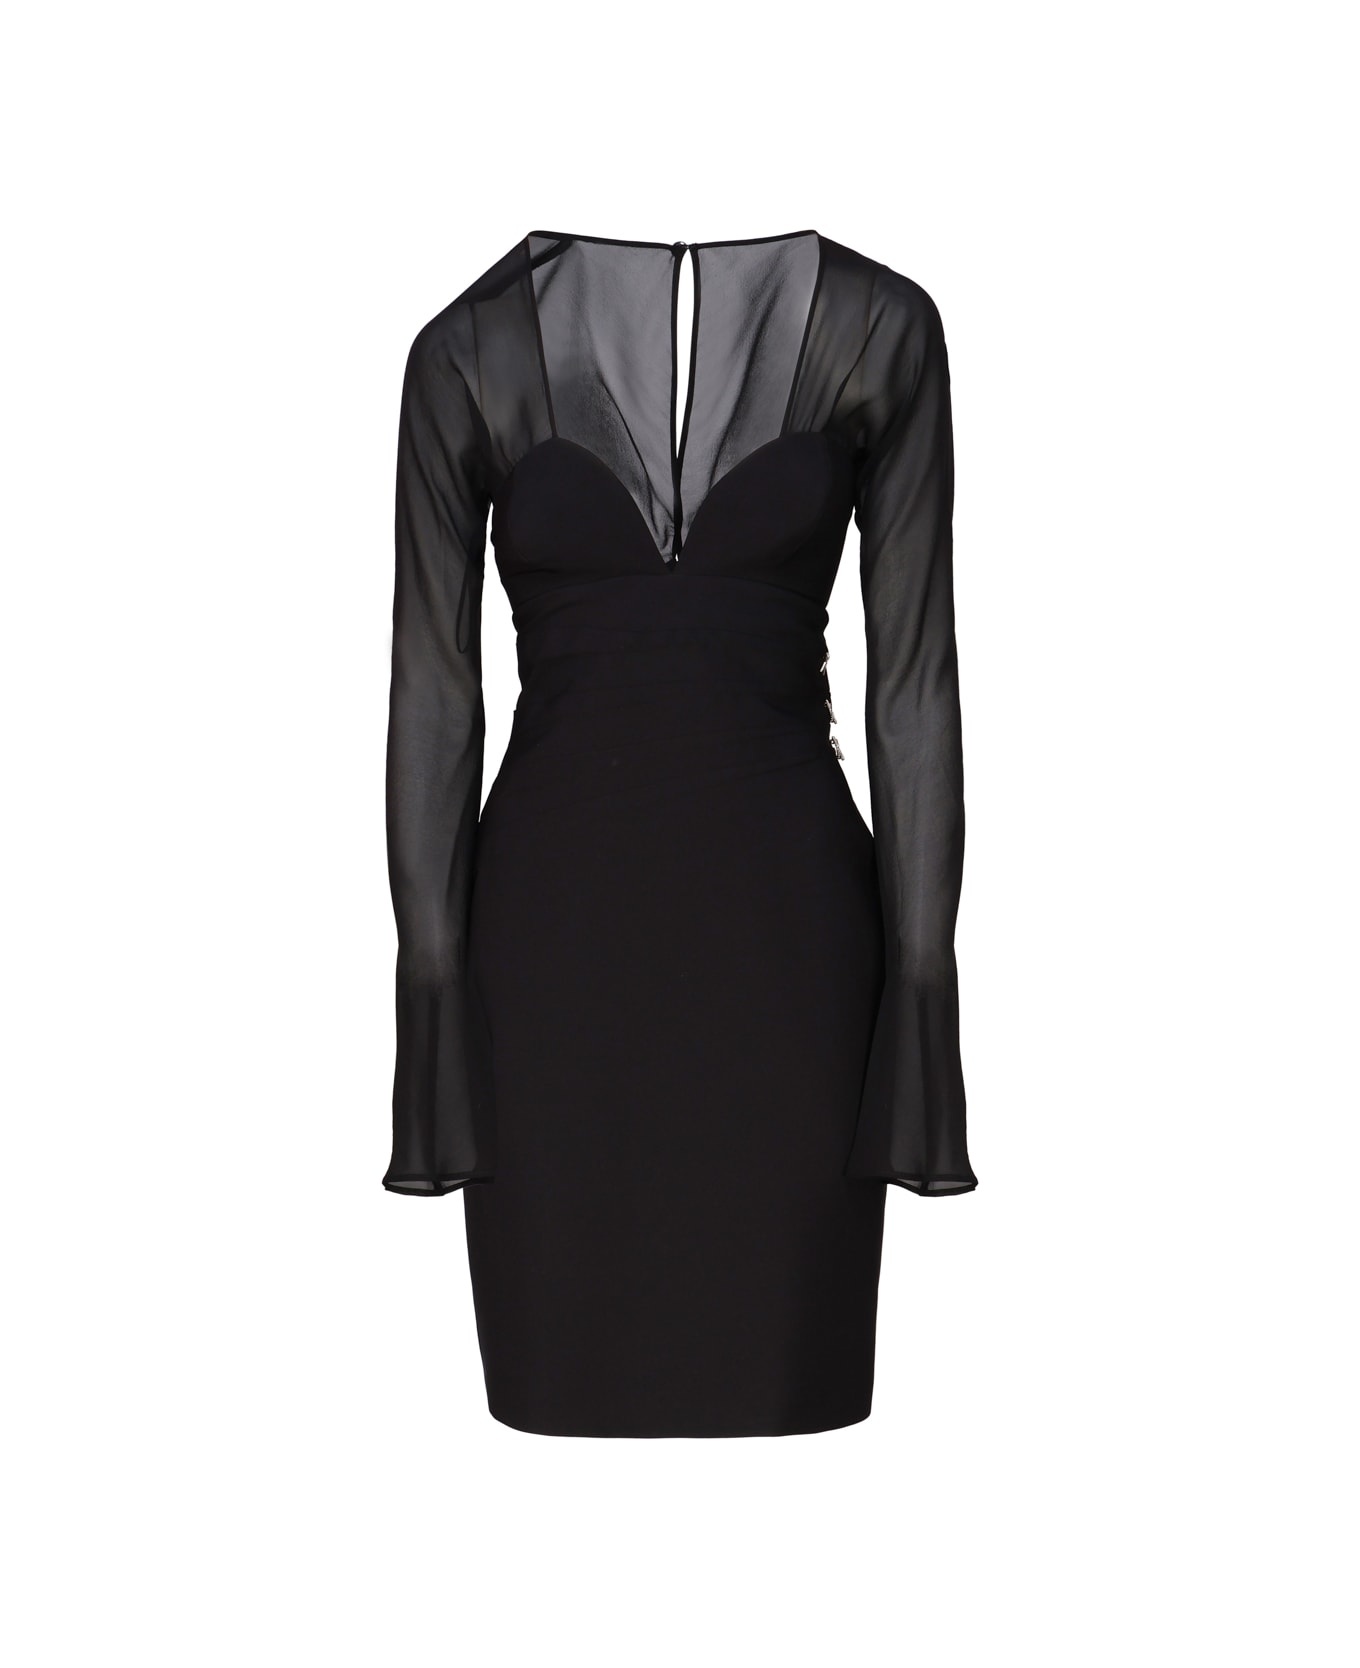 Genny Dress With Contrasting Fabric - Black